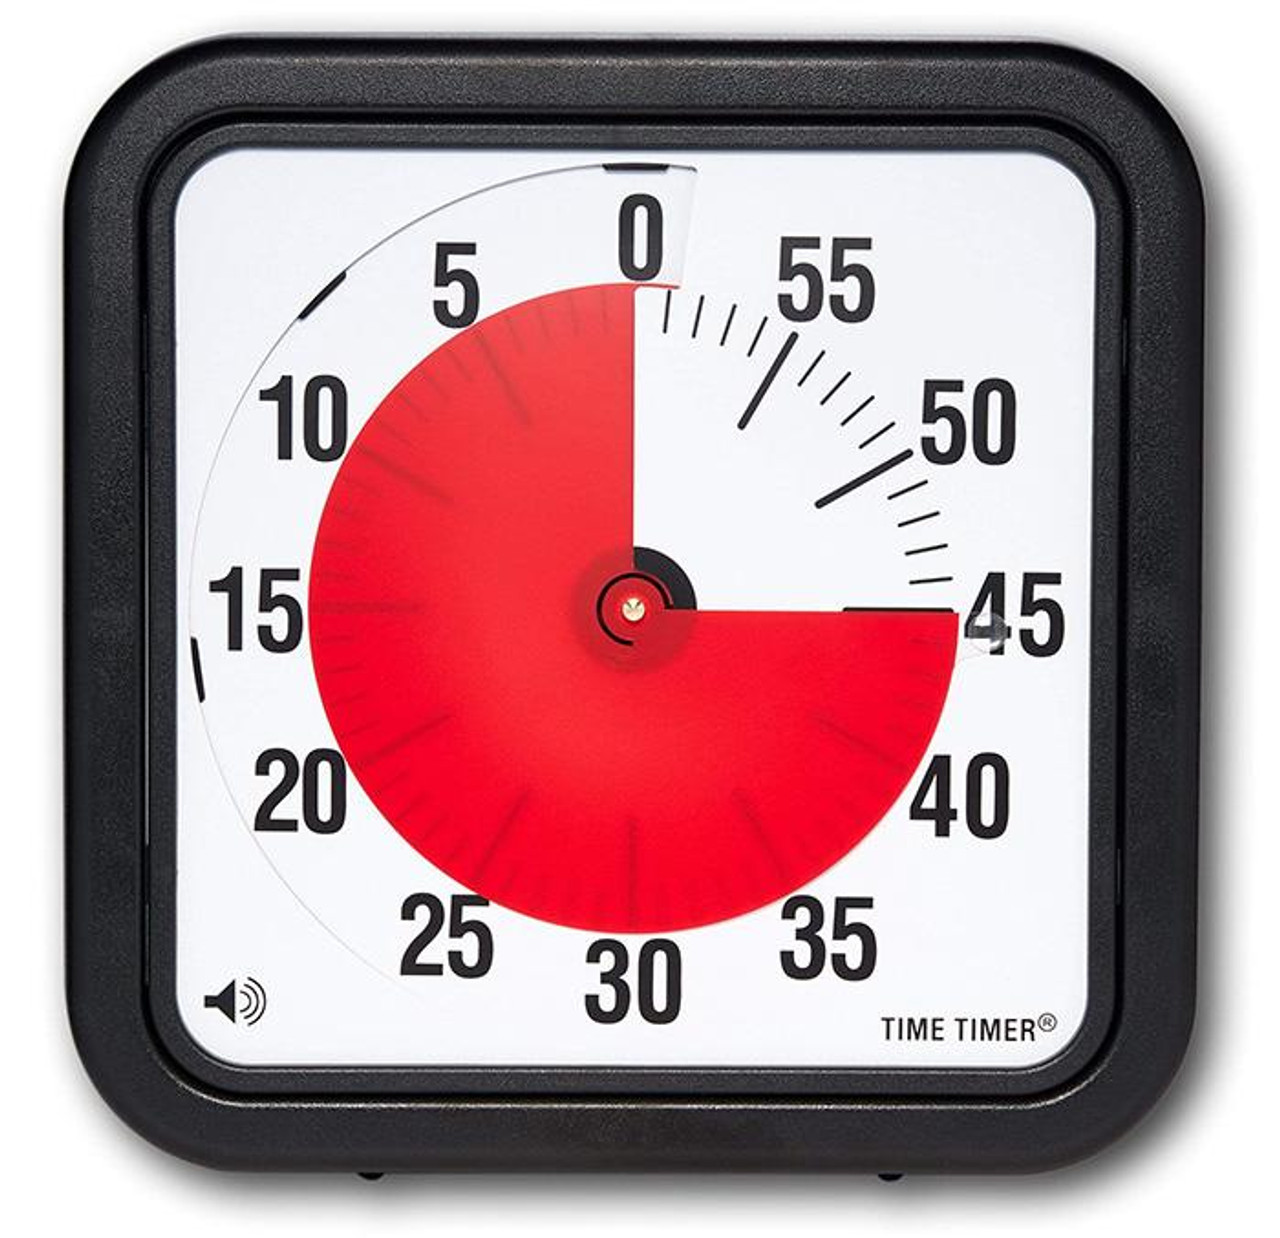 60-Minute Visual Timer- Clock Timer for Kids perfect Time